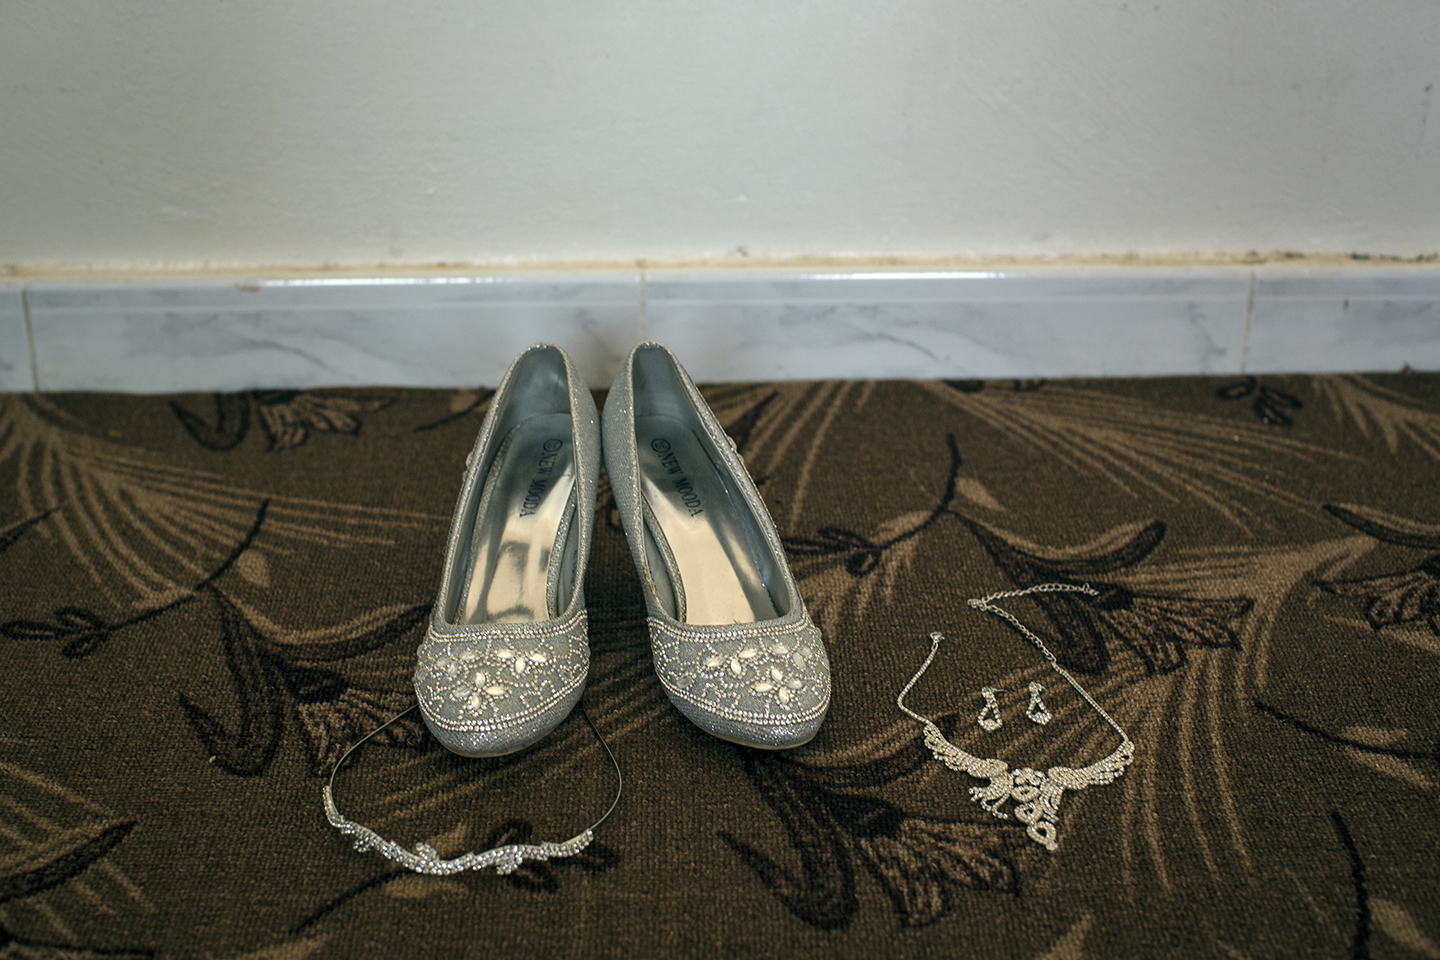  The dress was a rental, but Hala’s “Cinderella” shoes and costume wedding jewelry remain with her. 